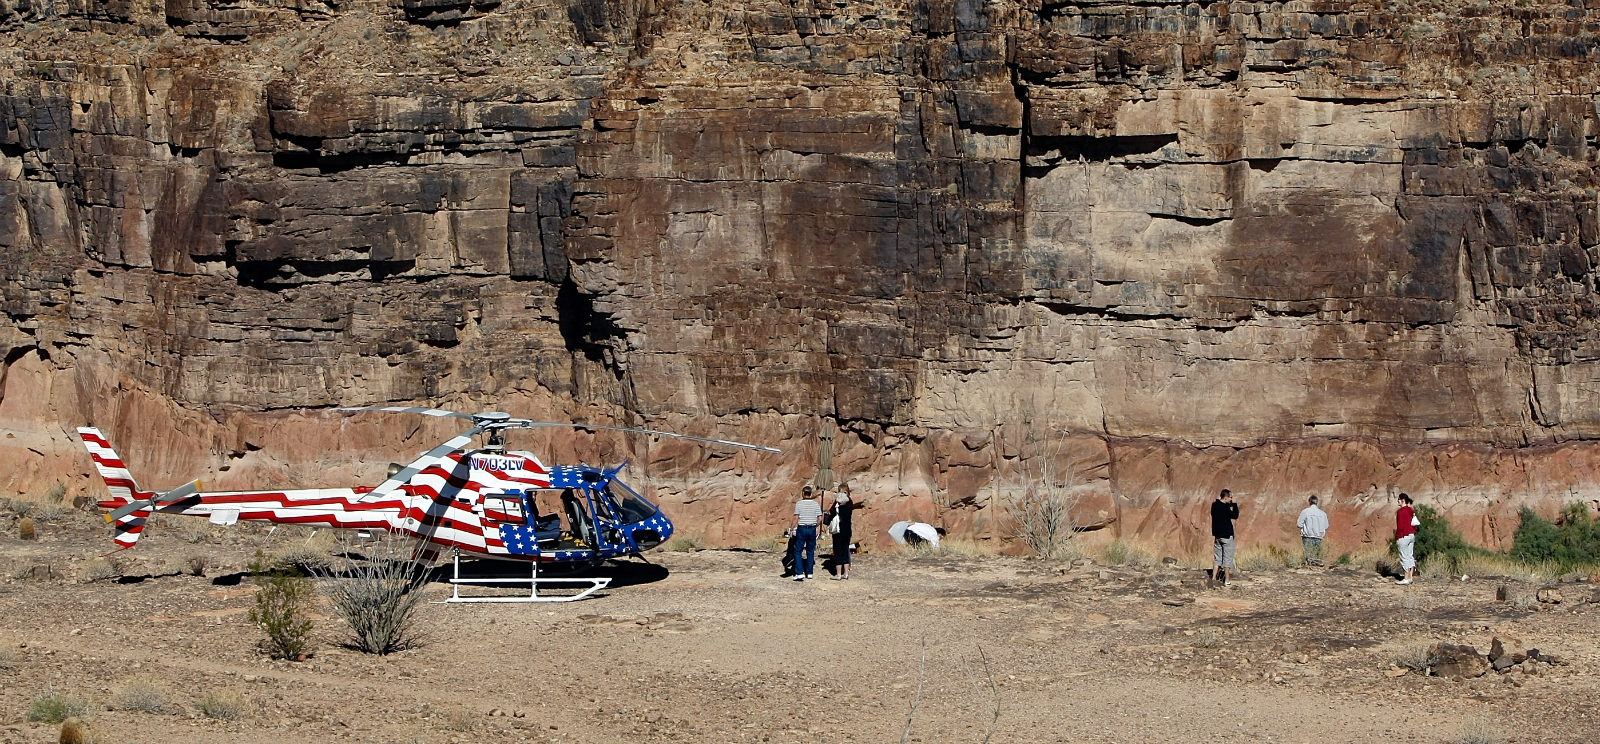 File Photo: A Grand Canyon tour helicopter parked near the West Rim